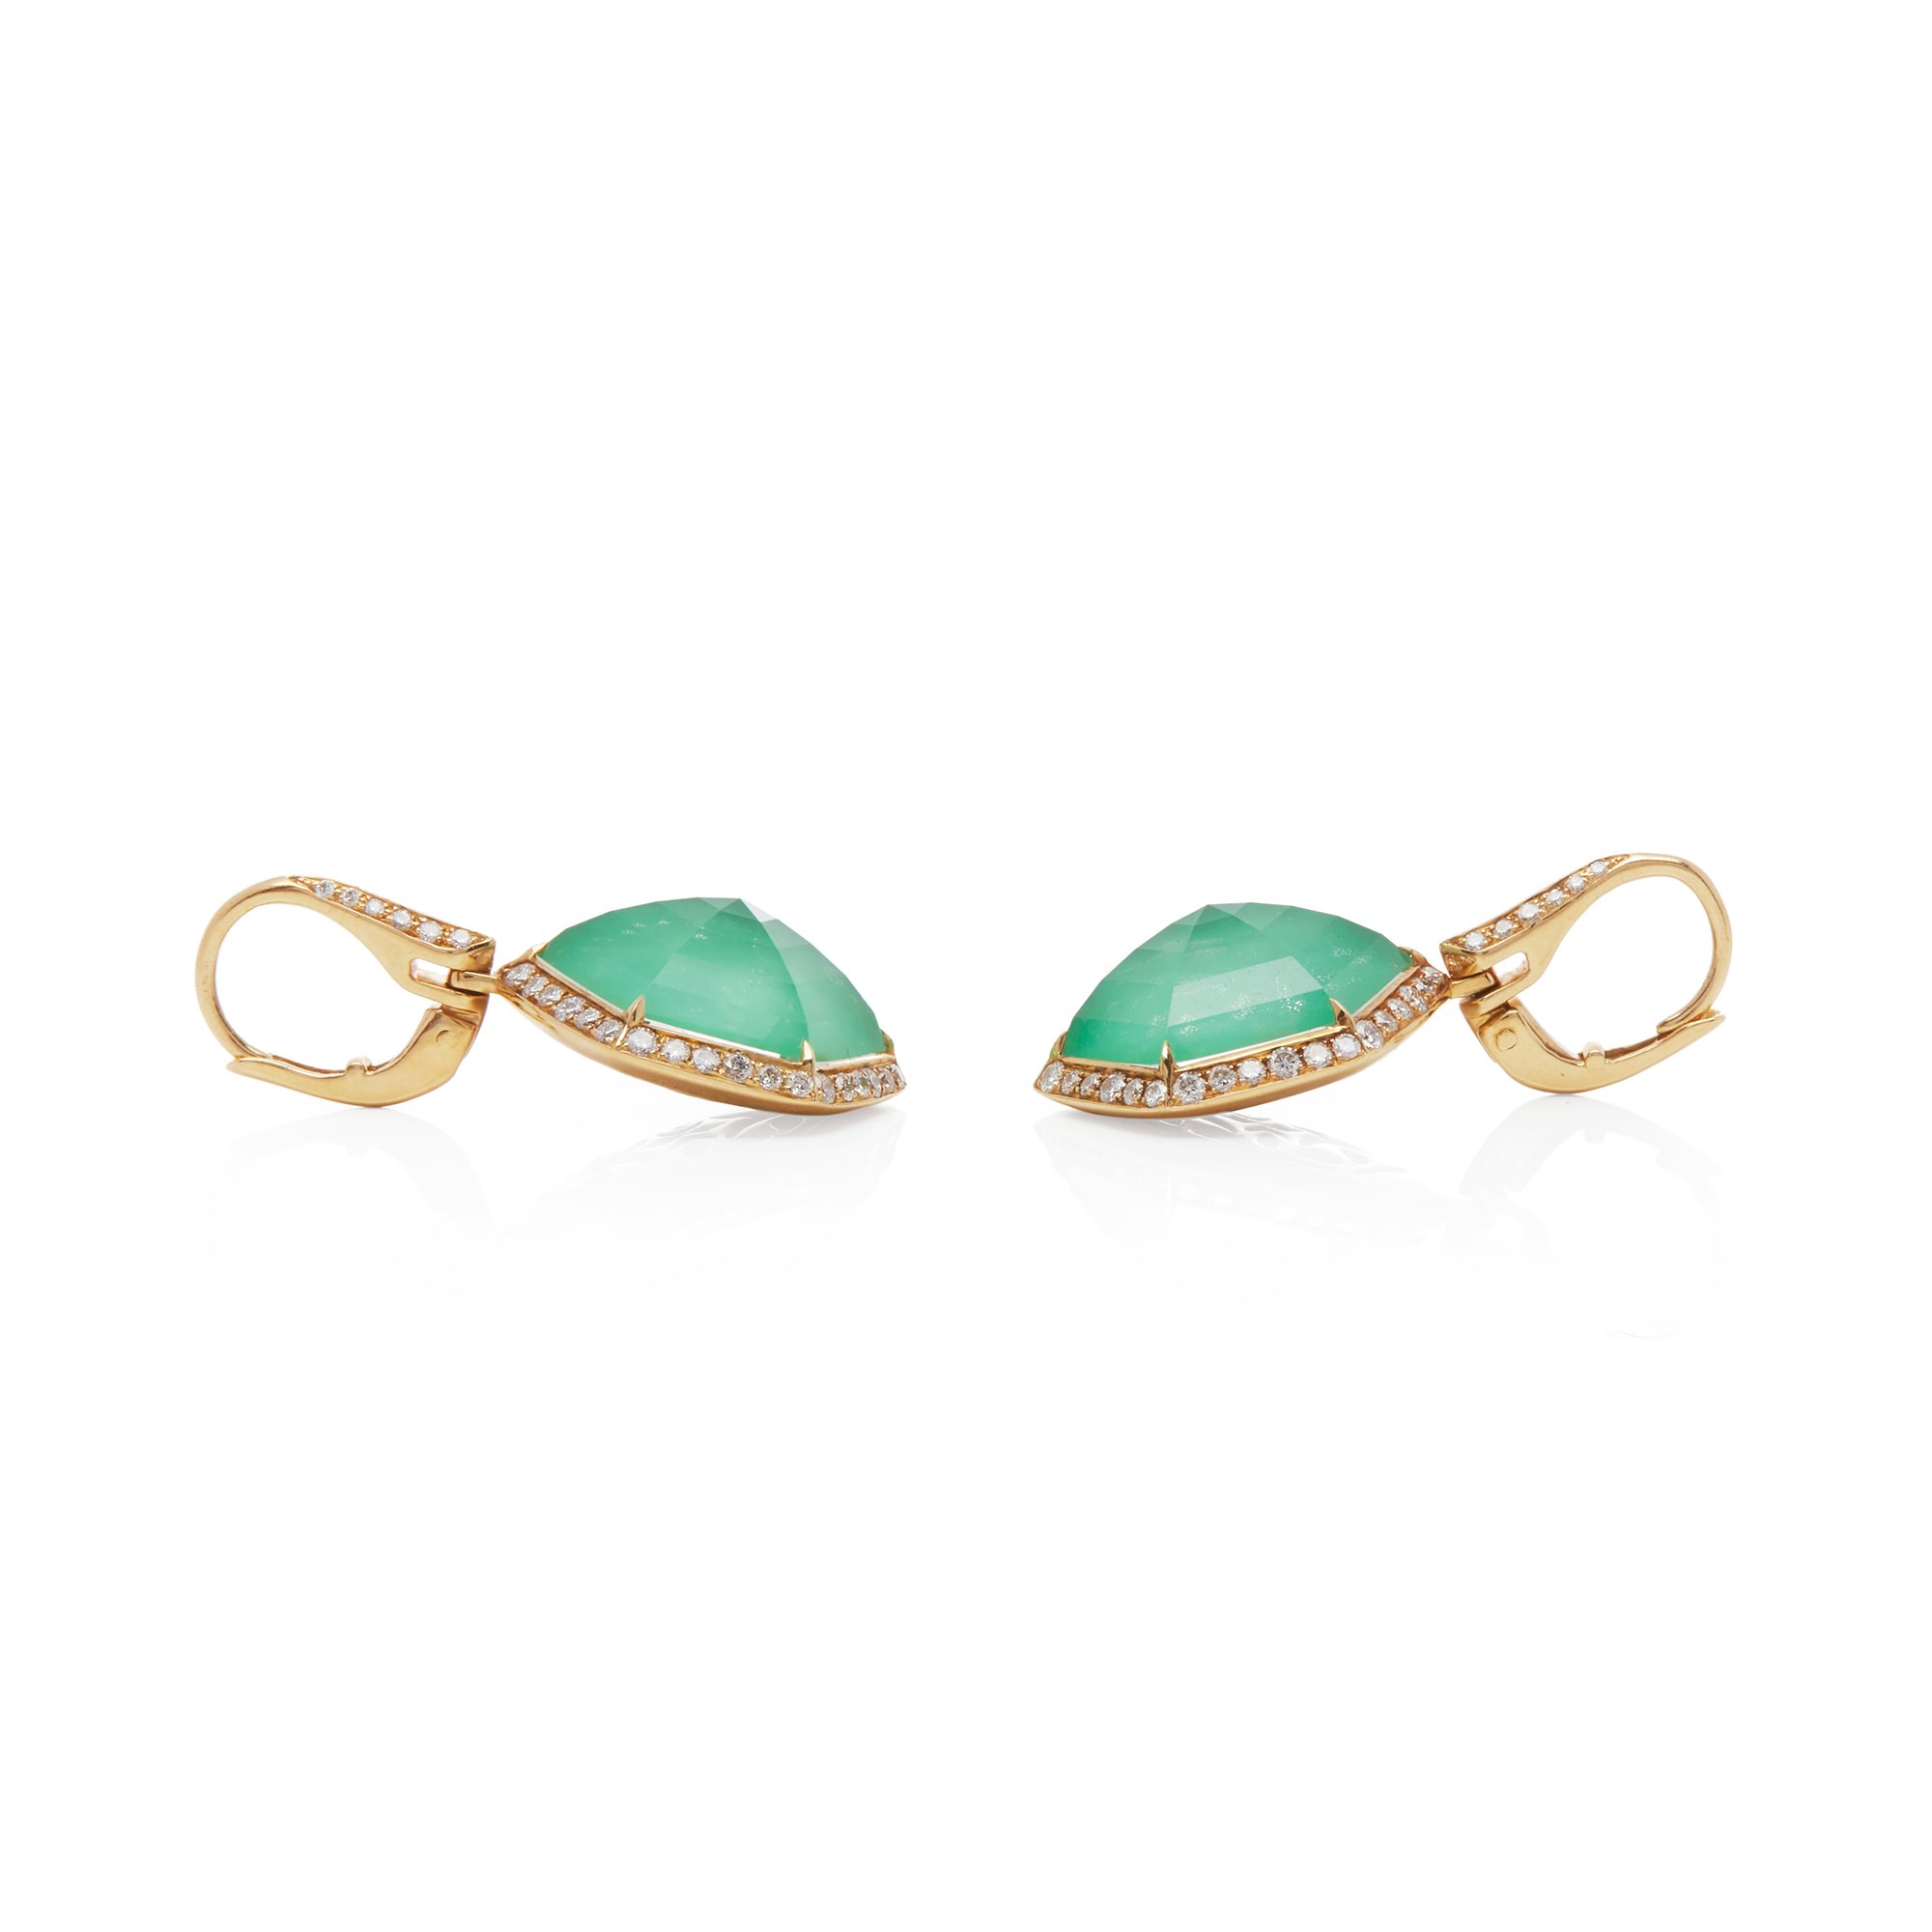 Stephen Webster 18ct Yellow Gold Deco Haze Green Agate and Diamond Drop Earrings